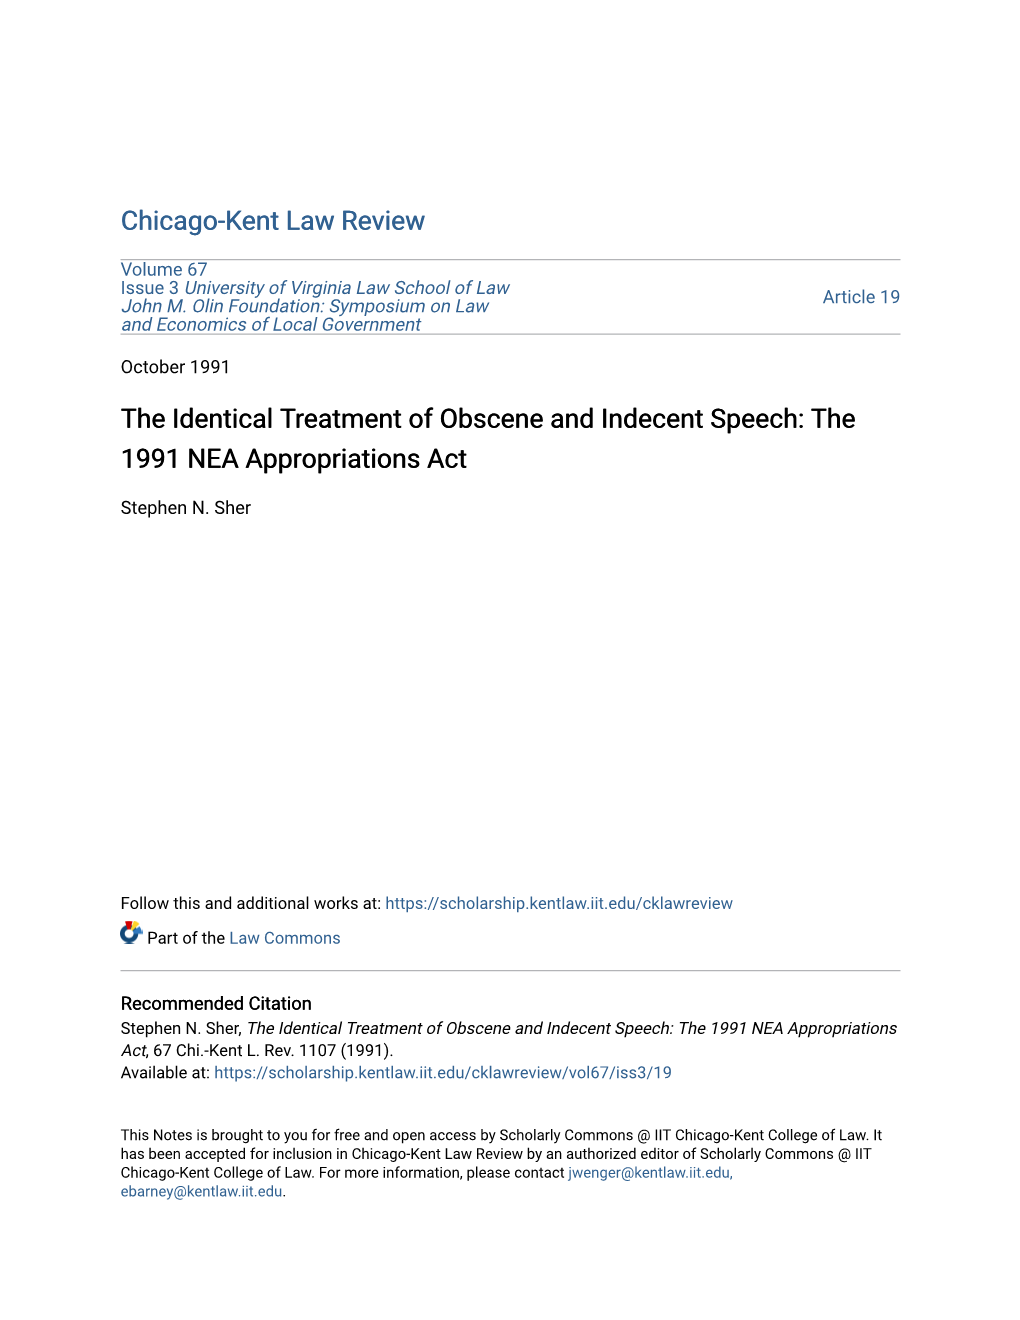 The Identical Treatment of Obscene and Indecent Speech: the 1991 NEA Appropriations Act